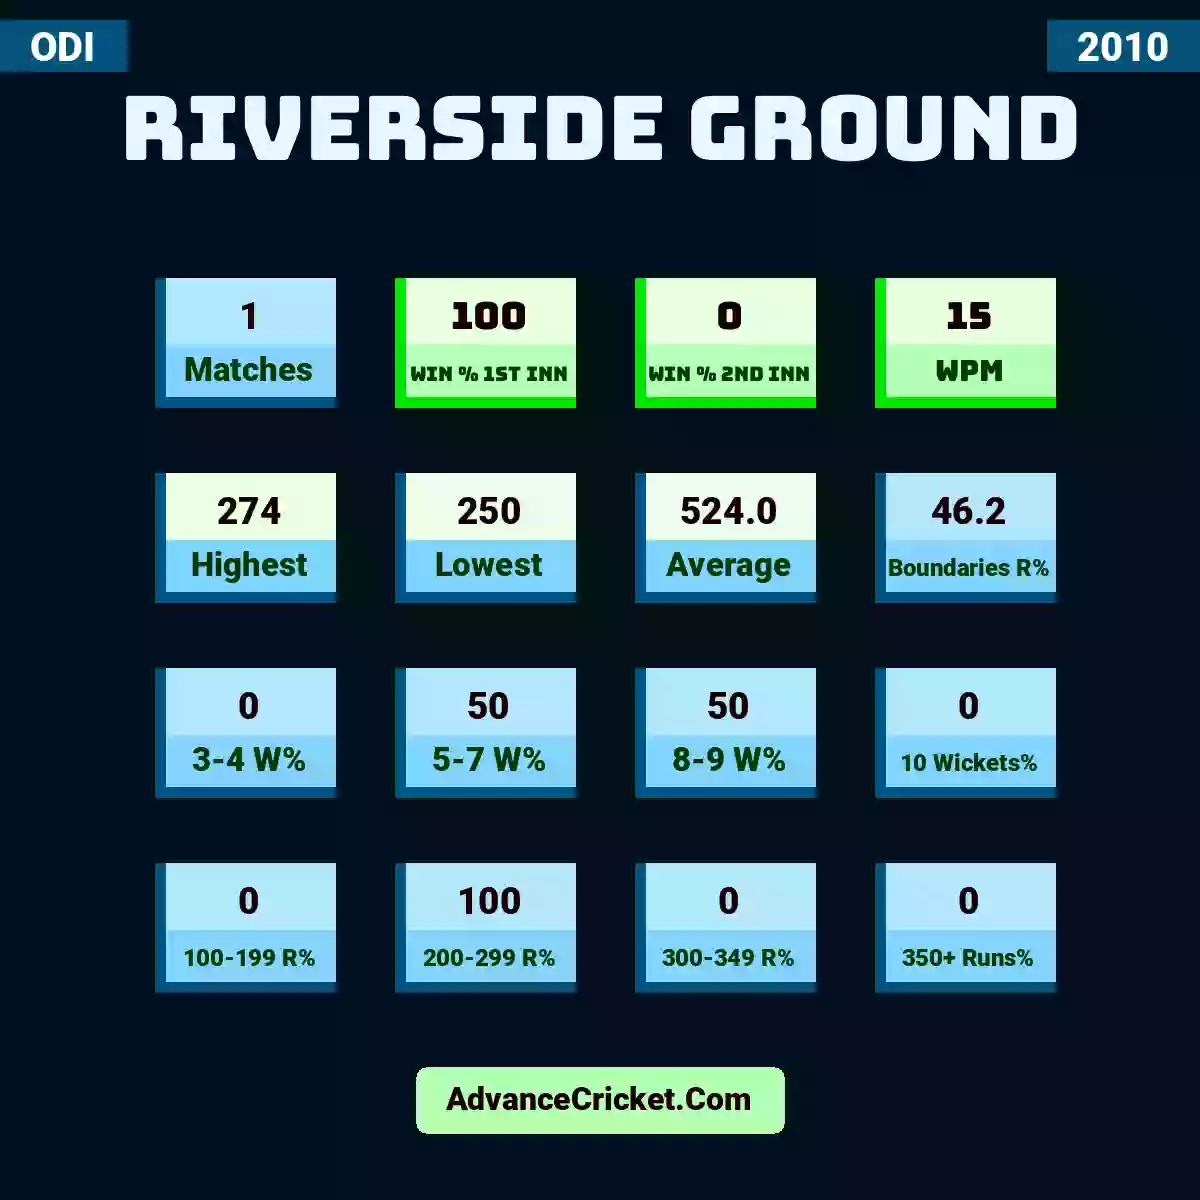 Image showing Riverside Ground with Matches: 1, Win % 1st Inn: 100, Win % 2nd Inn: 0, WPM: 15, Highest: 274, Lowest: 250, Average: 524.0, Boundaries R%: 46.2, 3-4 W%: 0, 5-7 W%: 50, 8-9 W%: 50, 10 Wickets%: 0, 100-199 R%: 0, 200-299 R%: 100, 300-349 R%: 0, 350+ Runs%: 0.